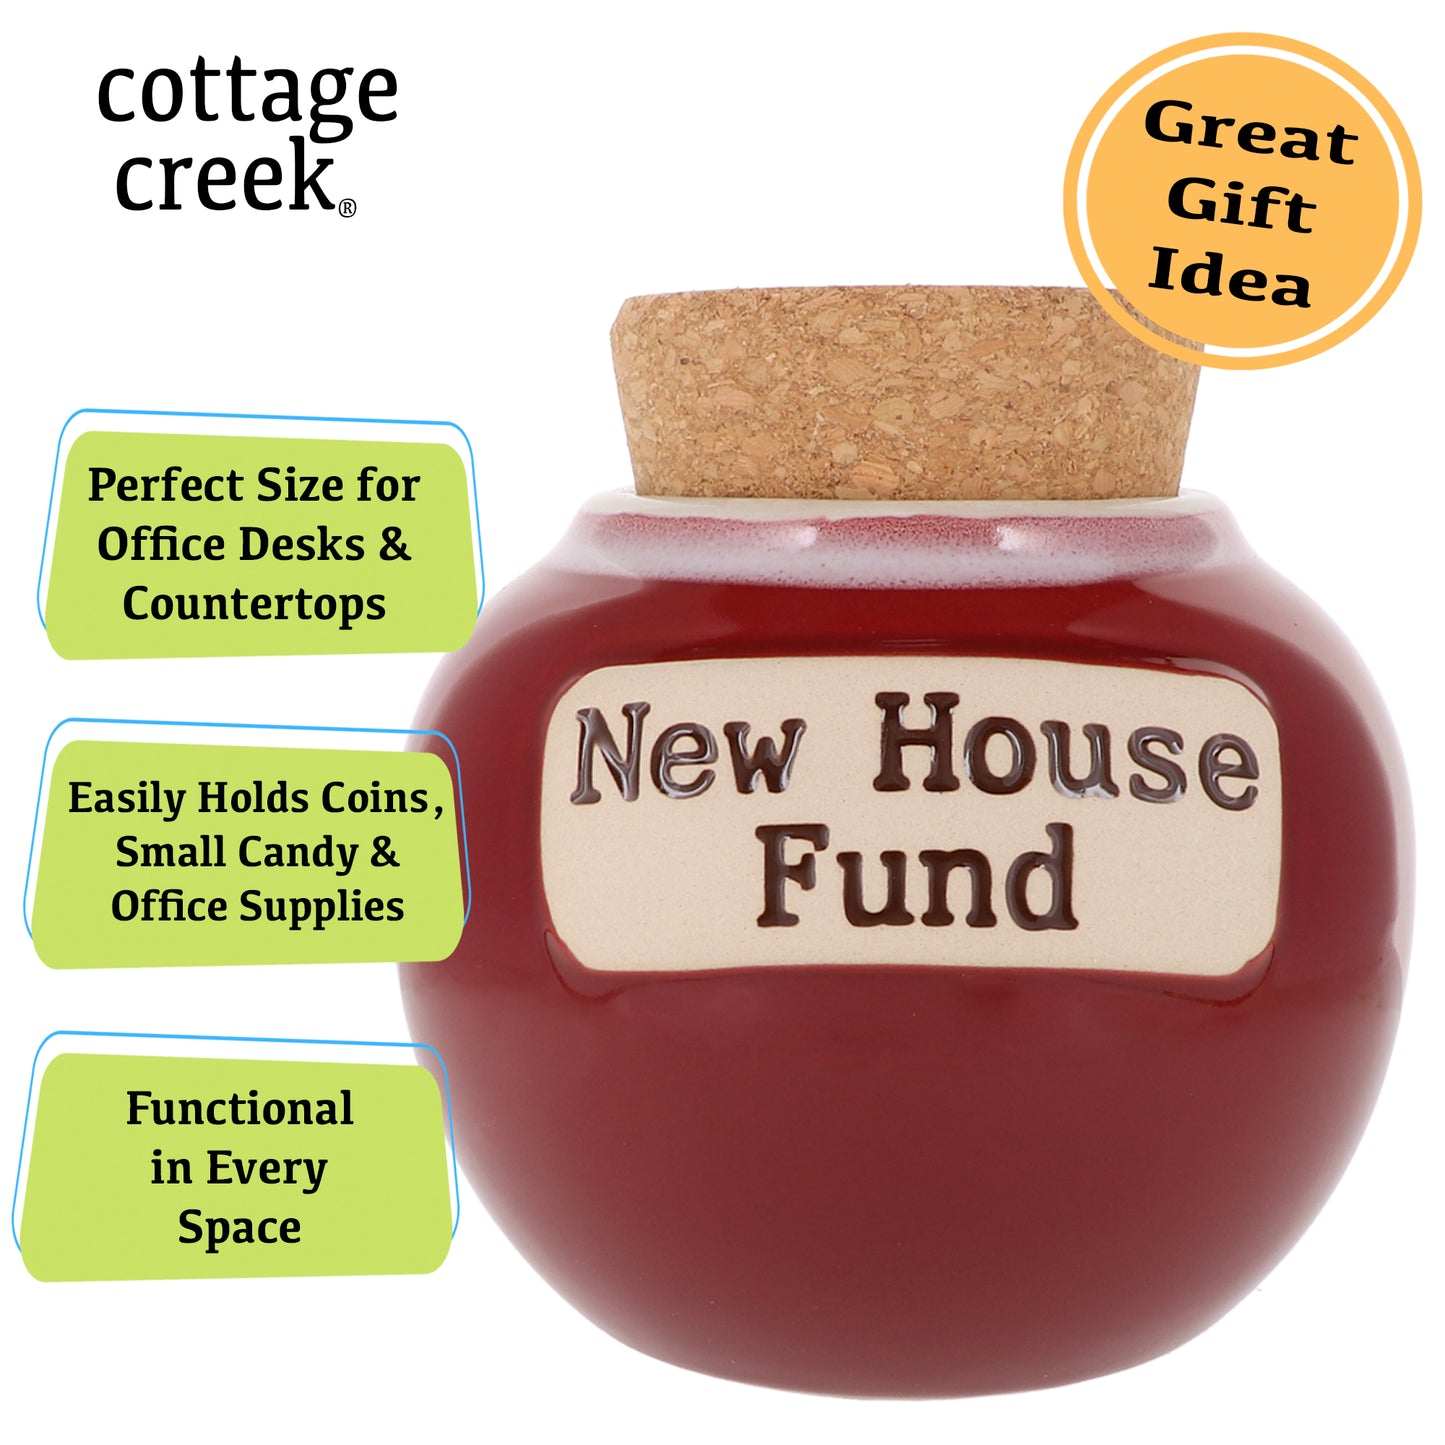 New House Fund Piggy Bank, Couples Gifts, Candy Jar